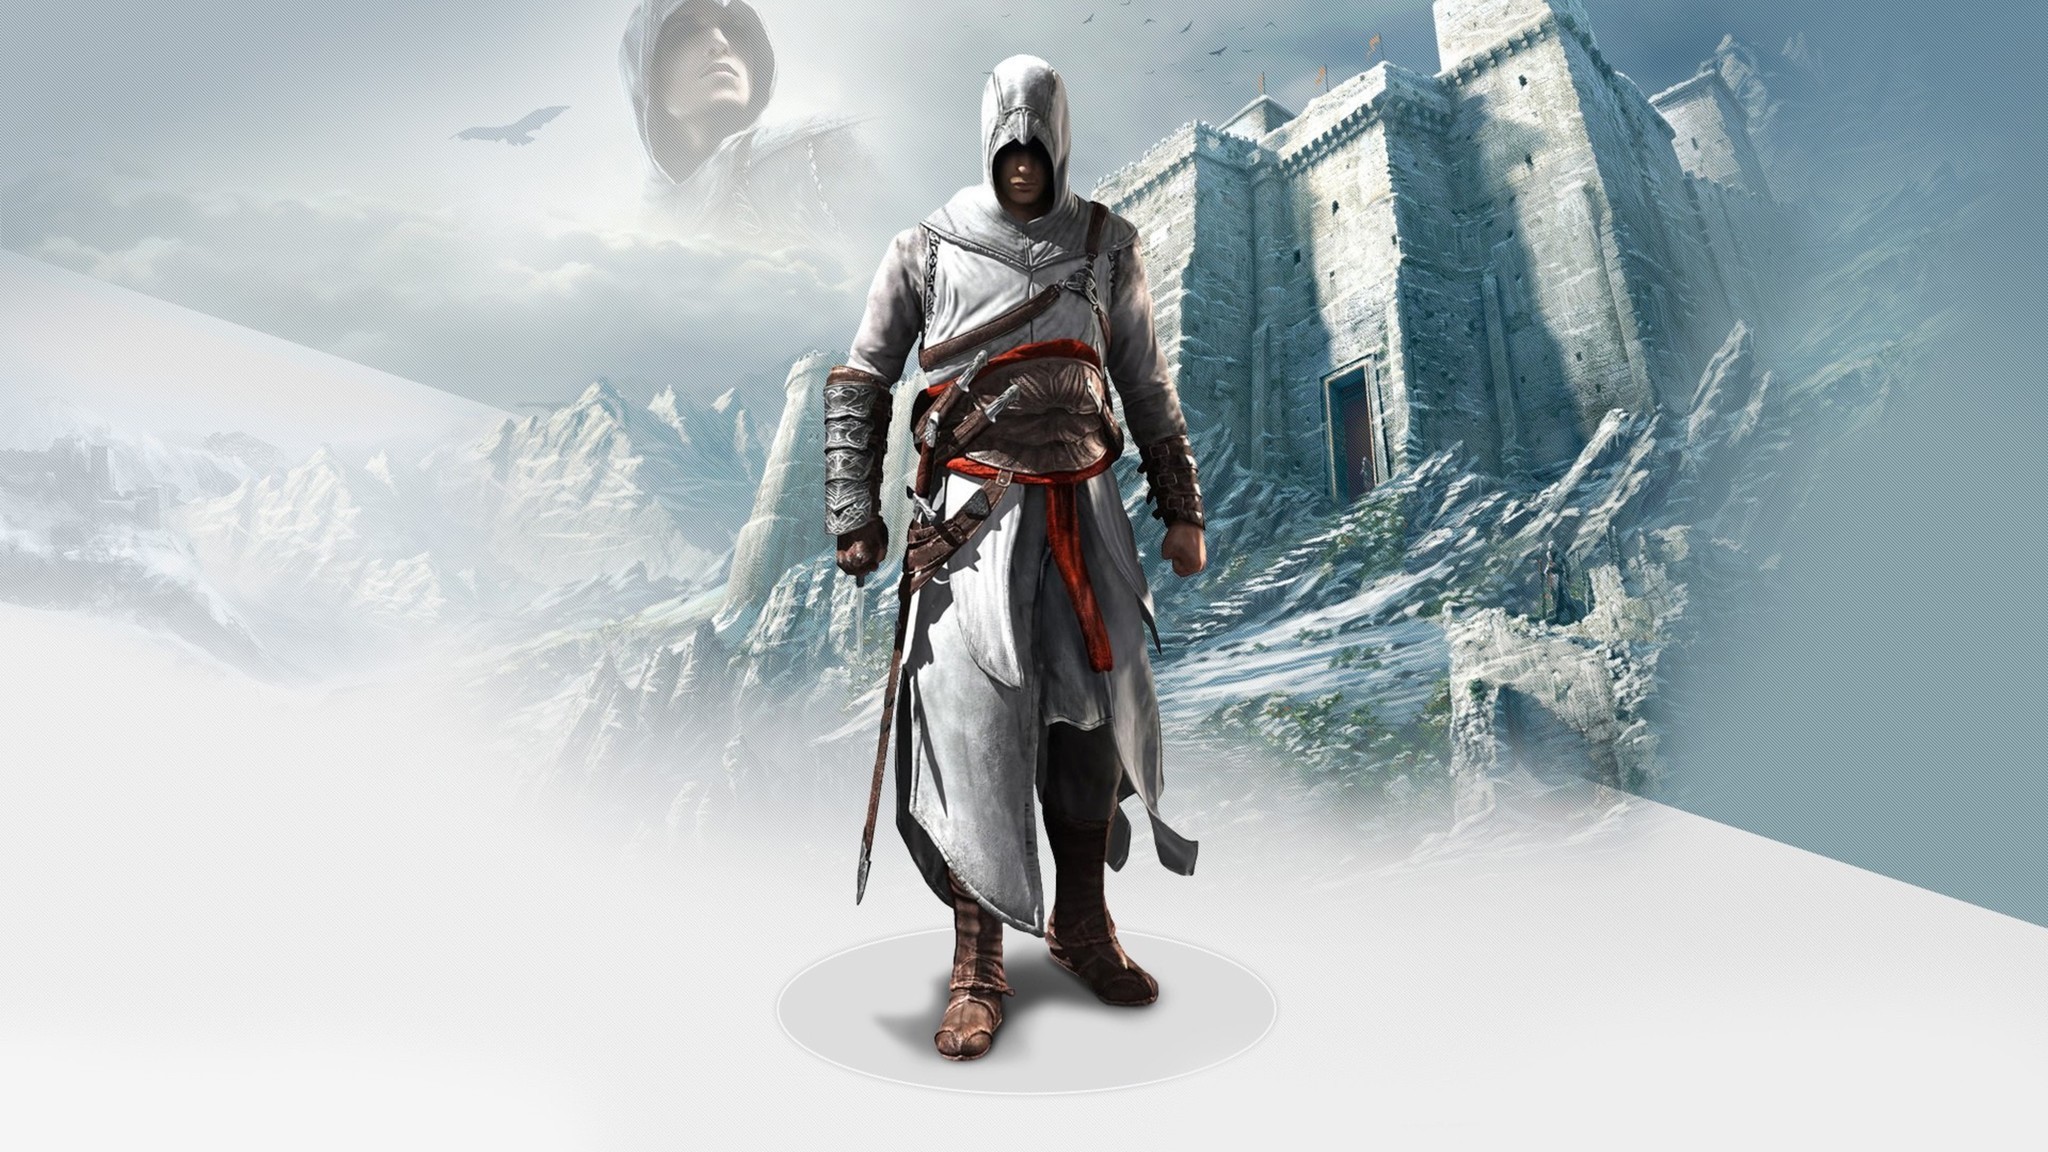 Download Altair In Assassins Creed 2 Hd 4k Wallpapers - Assassin's Creed Wallpaper Altair - HD Wallpaper 